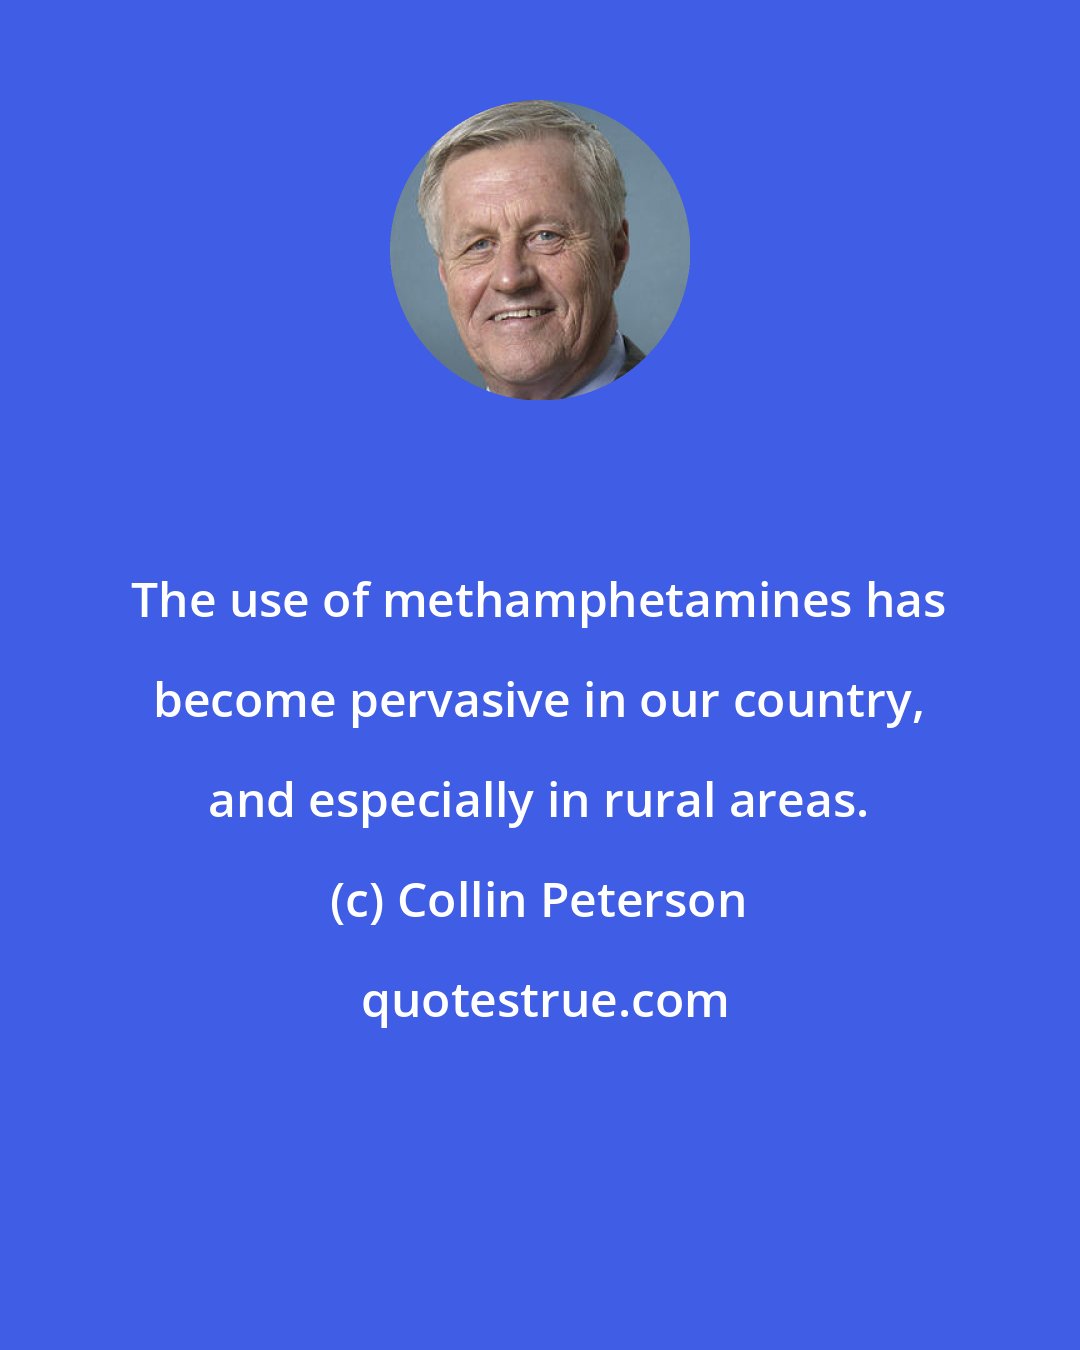 Collin Peterson: The use of methamphetamines has become pervasive in our country, and especially in rural areas.